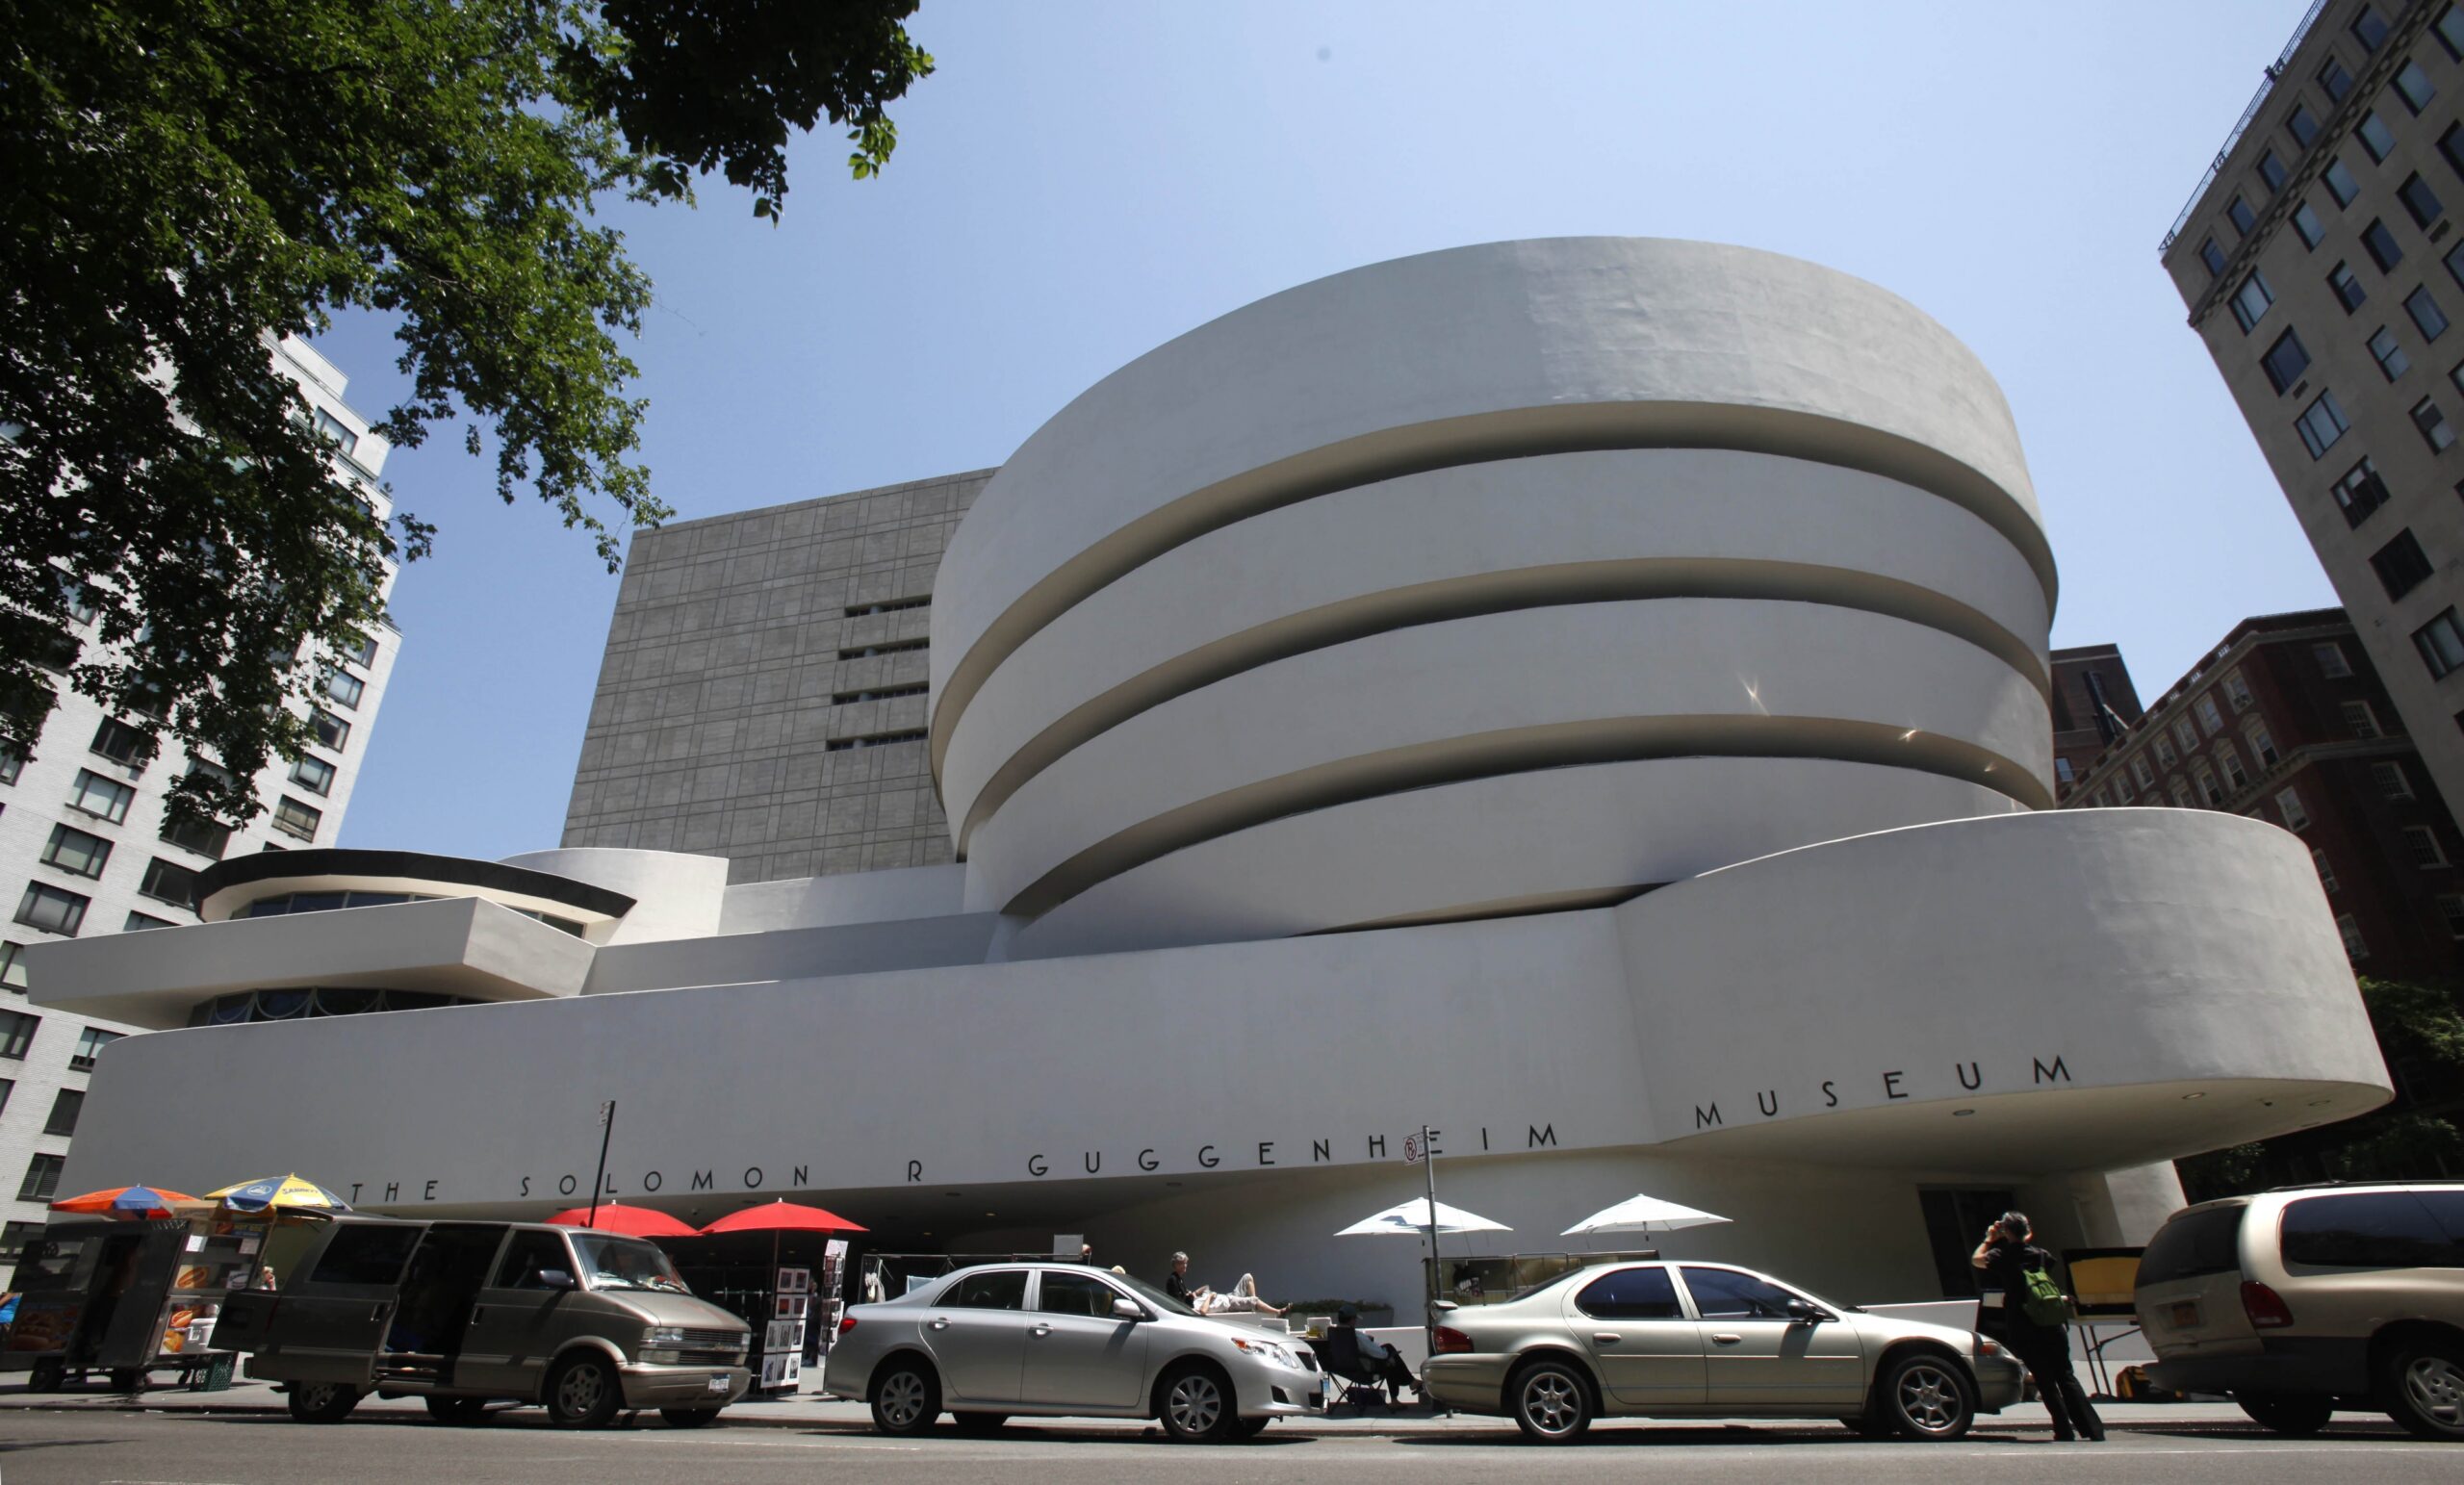 New York City's Guggenheim Museum which was designed by Frank Lloyd Wright